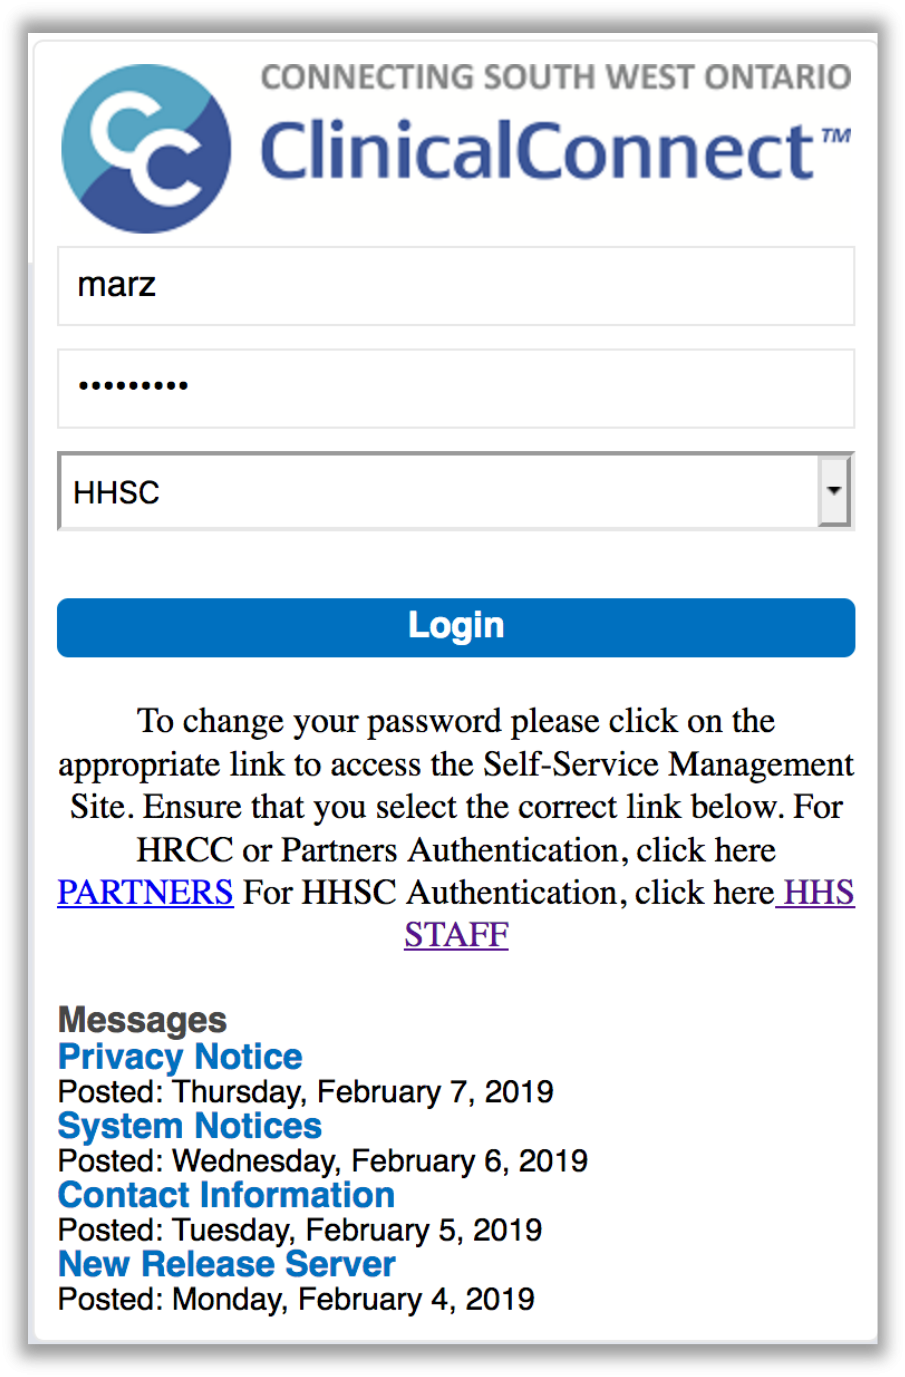 Image of the ClinicalConnect login page